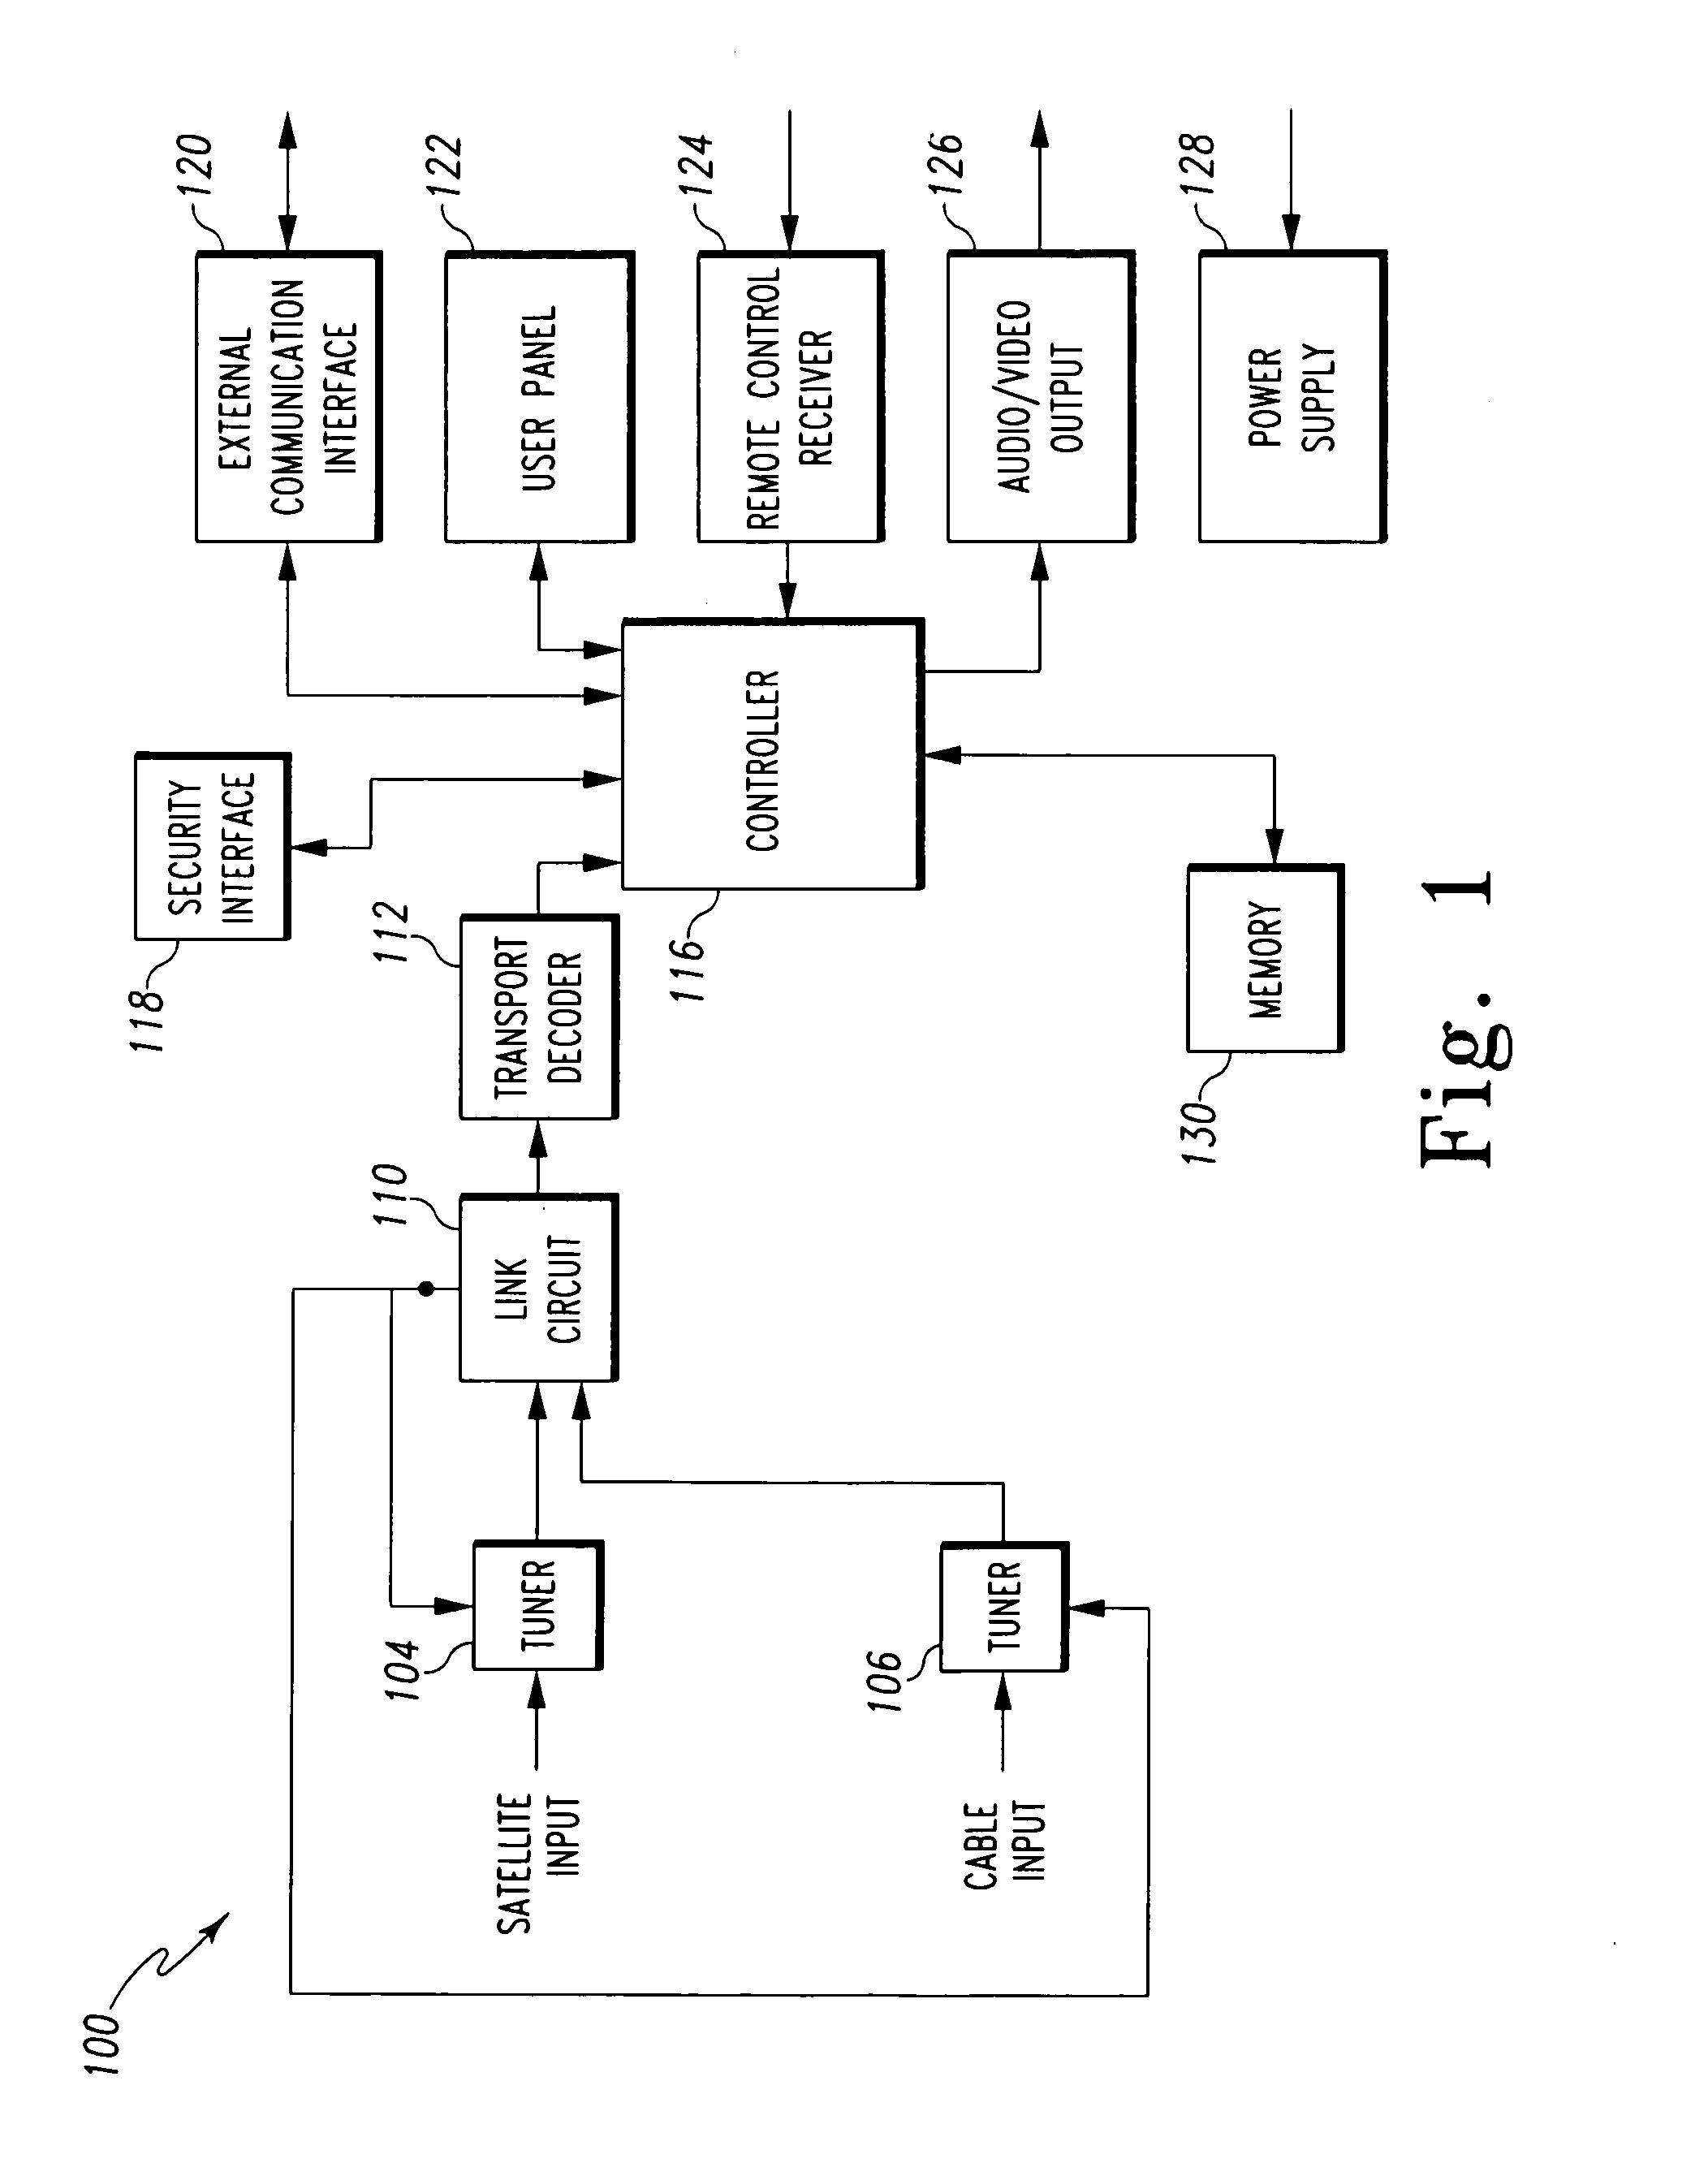 Apparatus and method for determination of signal format